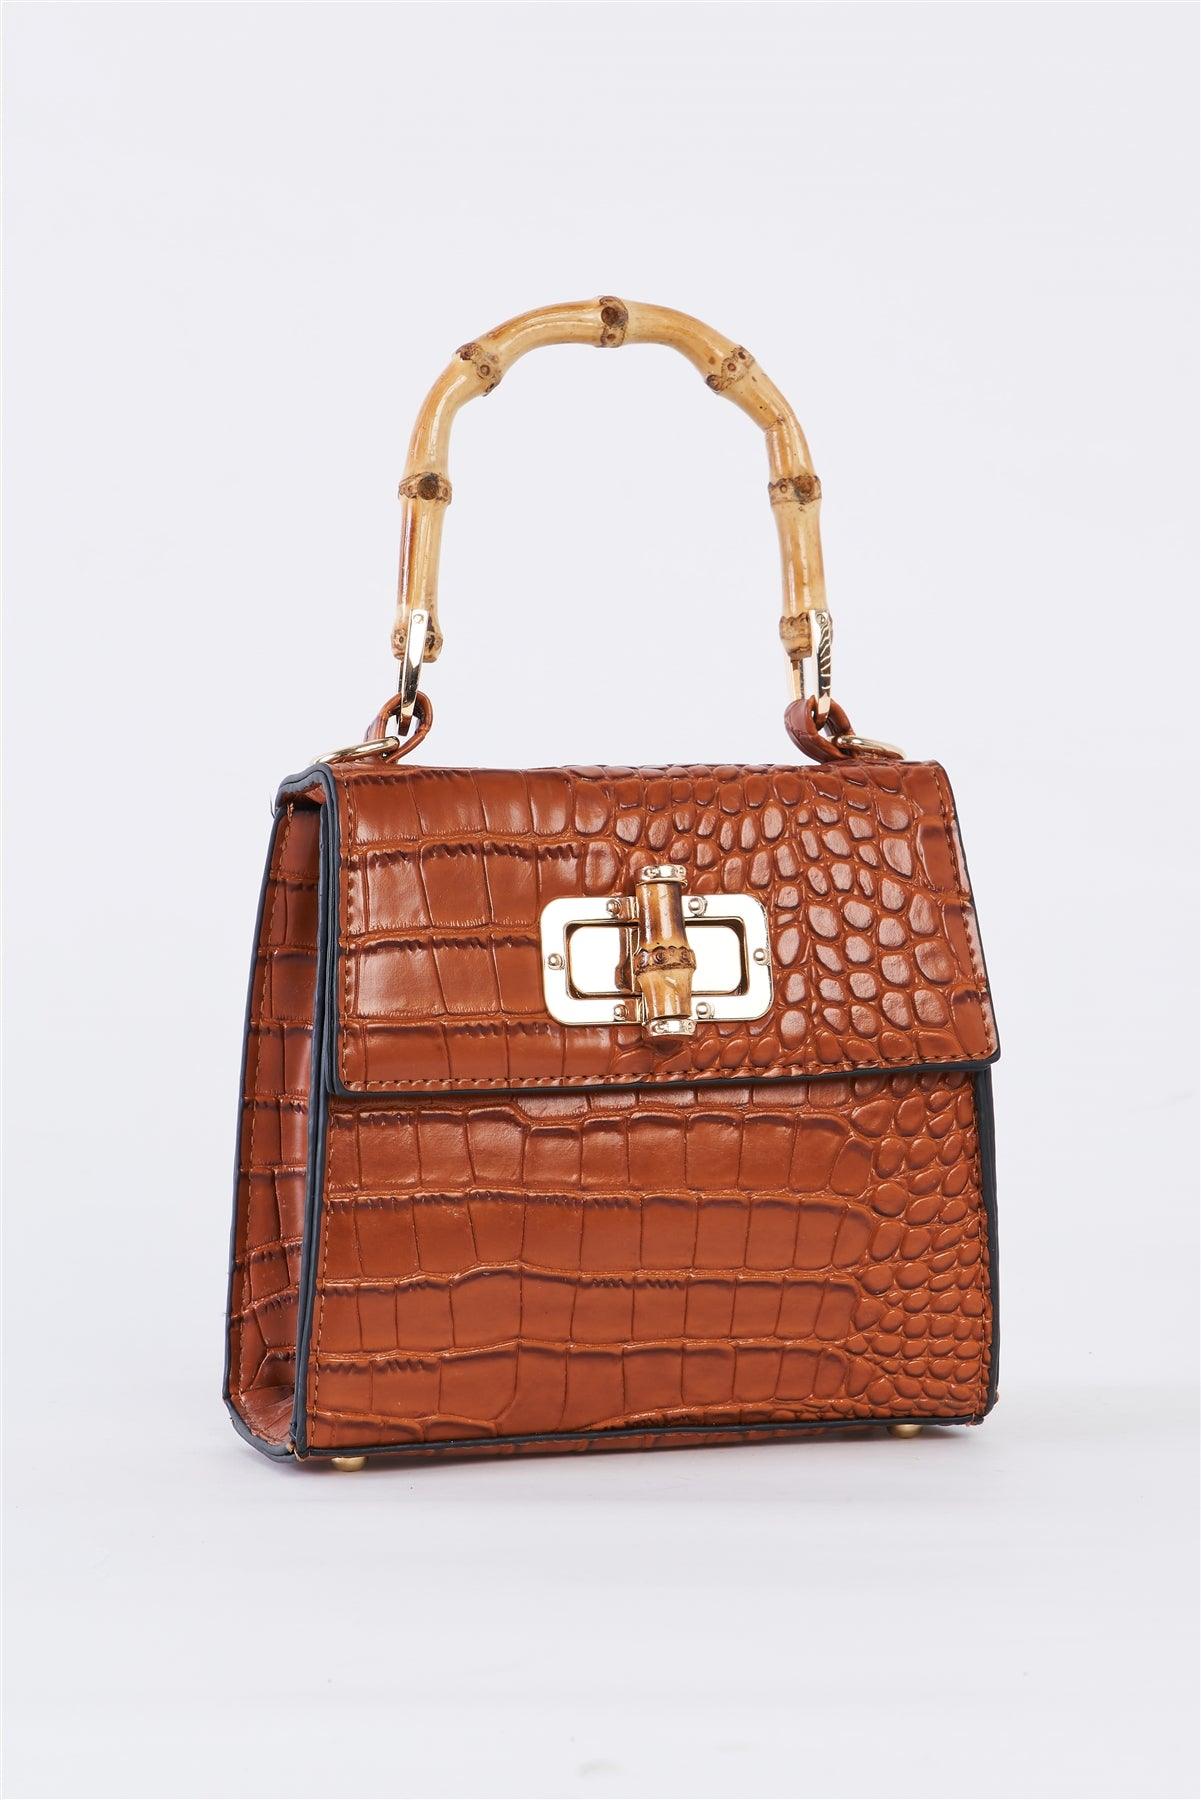 Dreamy Bahamas Camel Faux Alligator Skin Handbag With Bamboo Handle Accent /3 Bags